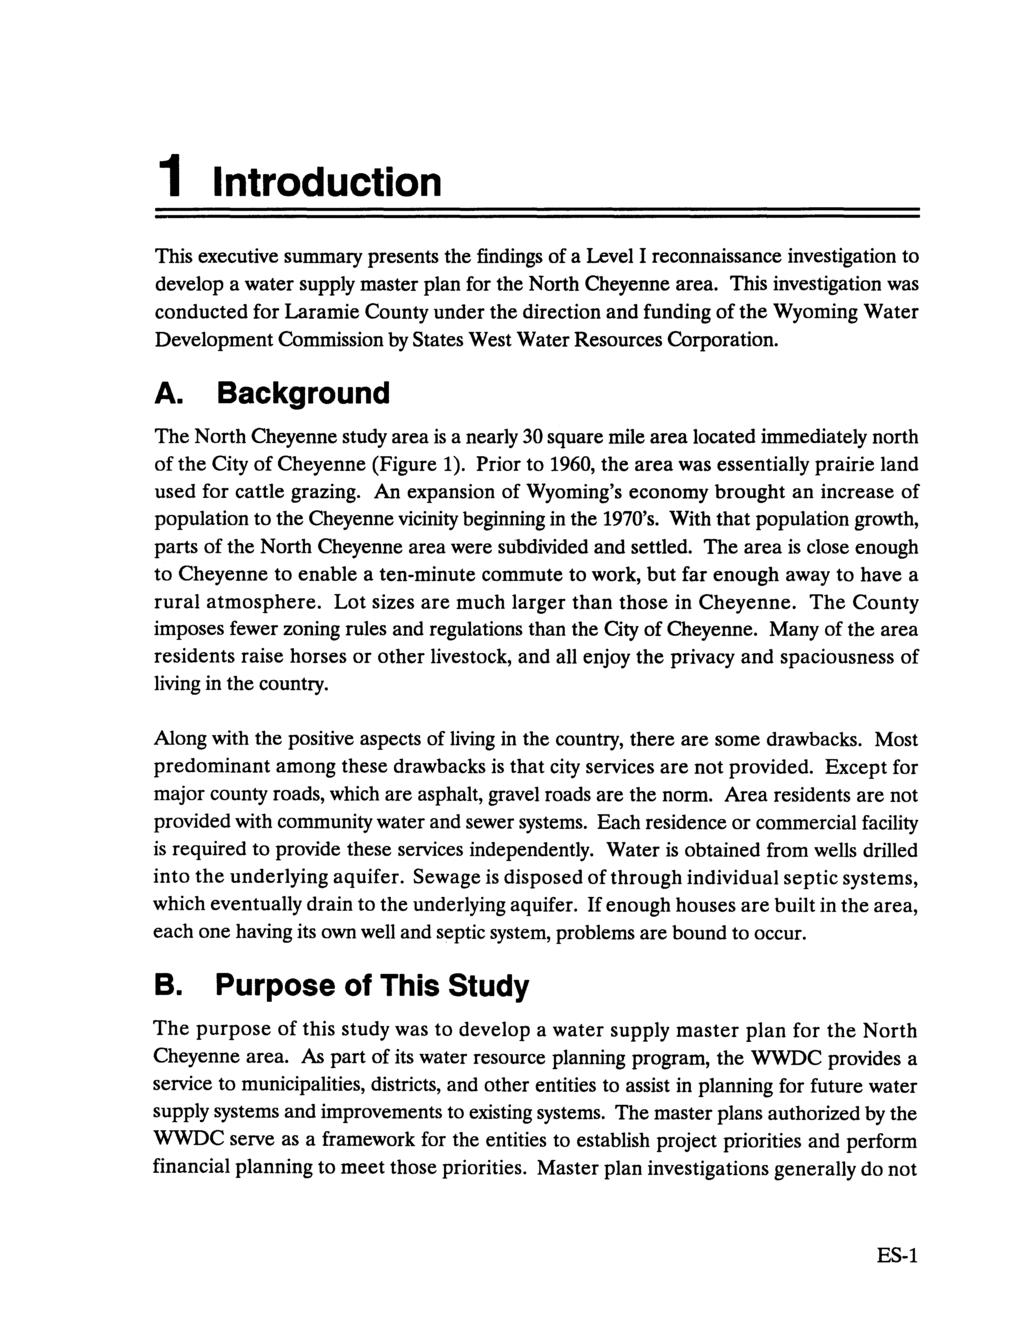 1 Introduction This executive summary presents the findings of a Level I reconnaissance investigation to develop a water supply master plan for the North Cheyenne area.